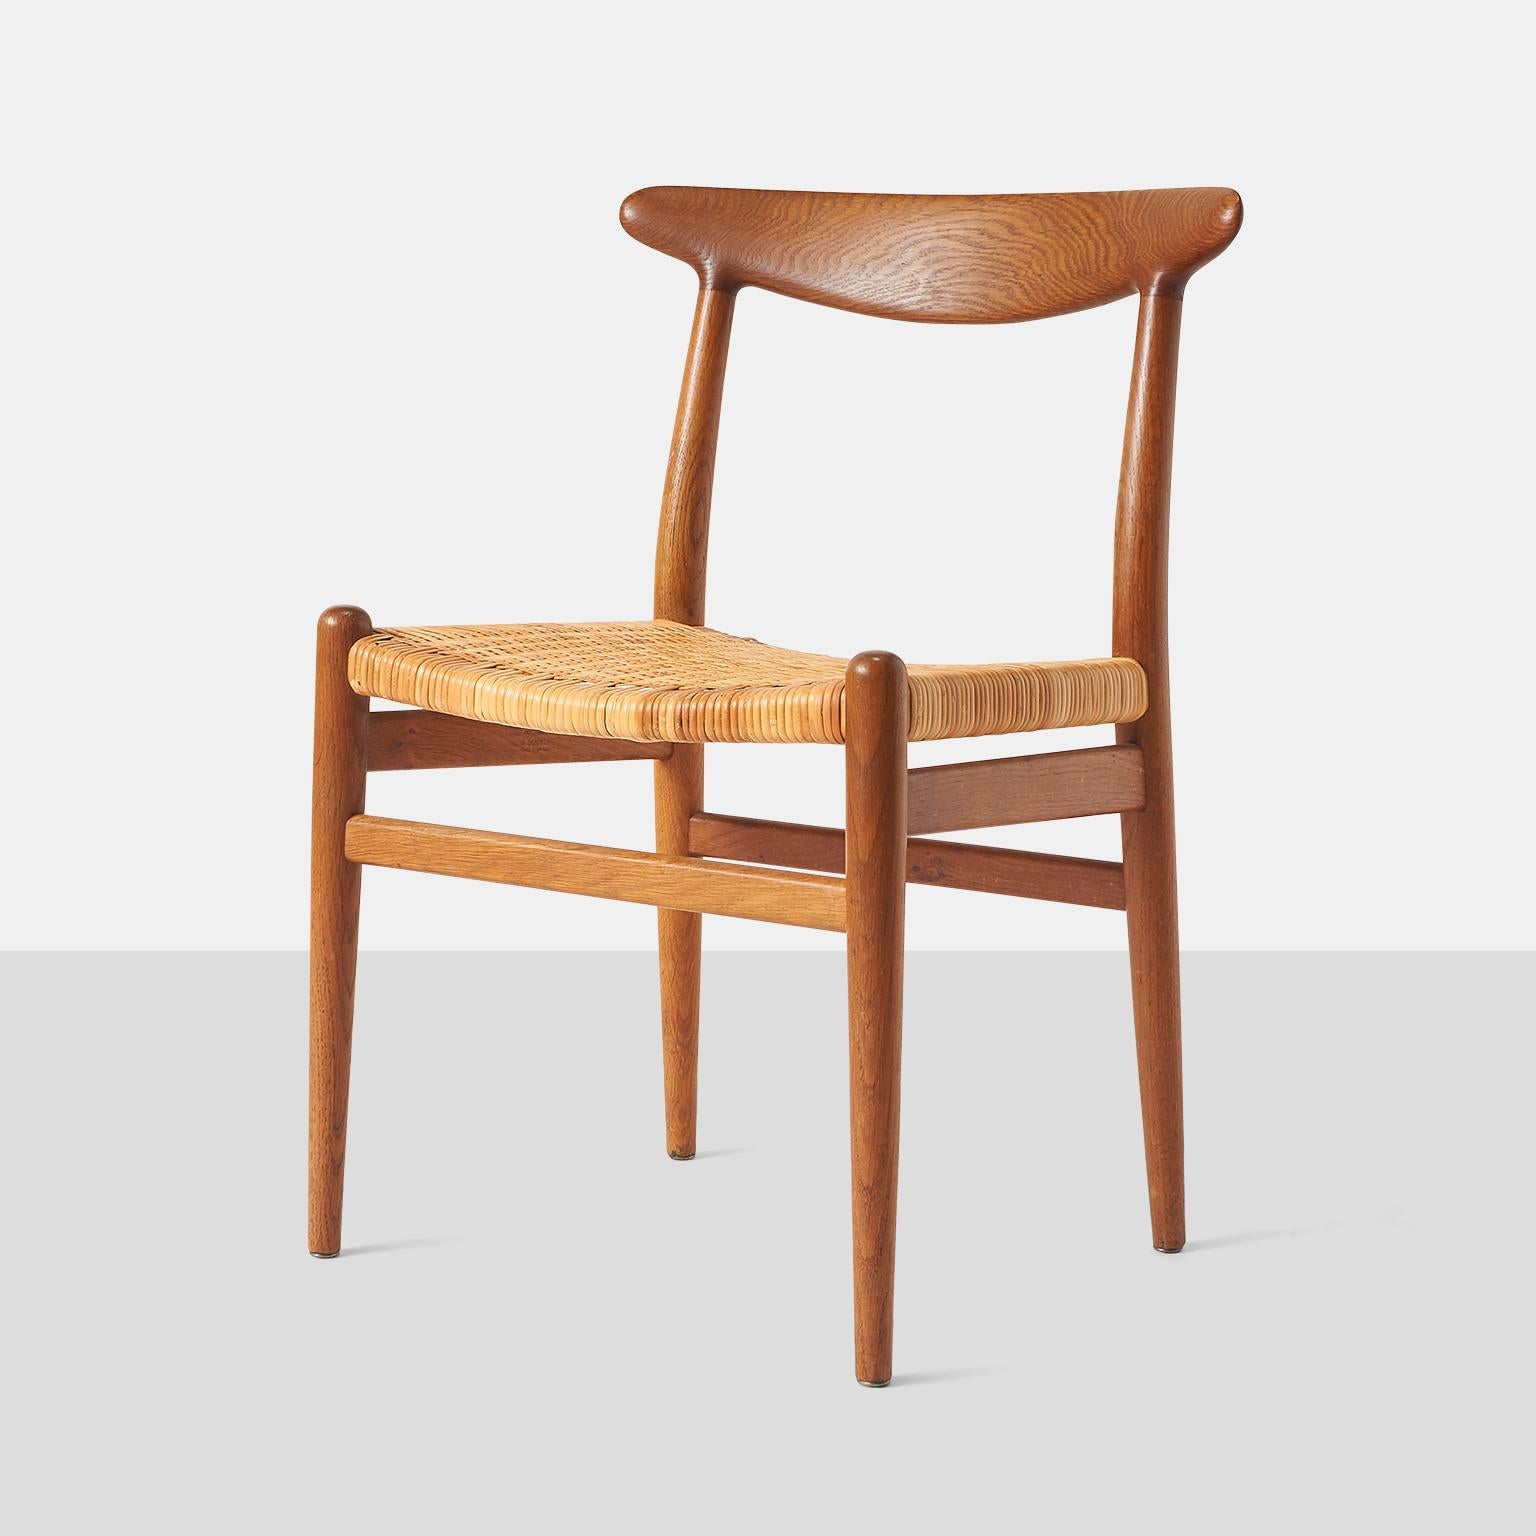 A set of five stained oak and cane dining chairs. Each chair frame is branded with the manufacturer's mark; [C.M. Madsen Fabriker Haarby Danmark Made in Denmark Design: Hans J. Wegner].



